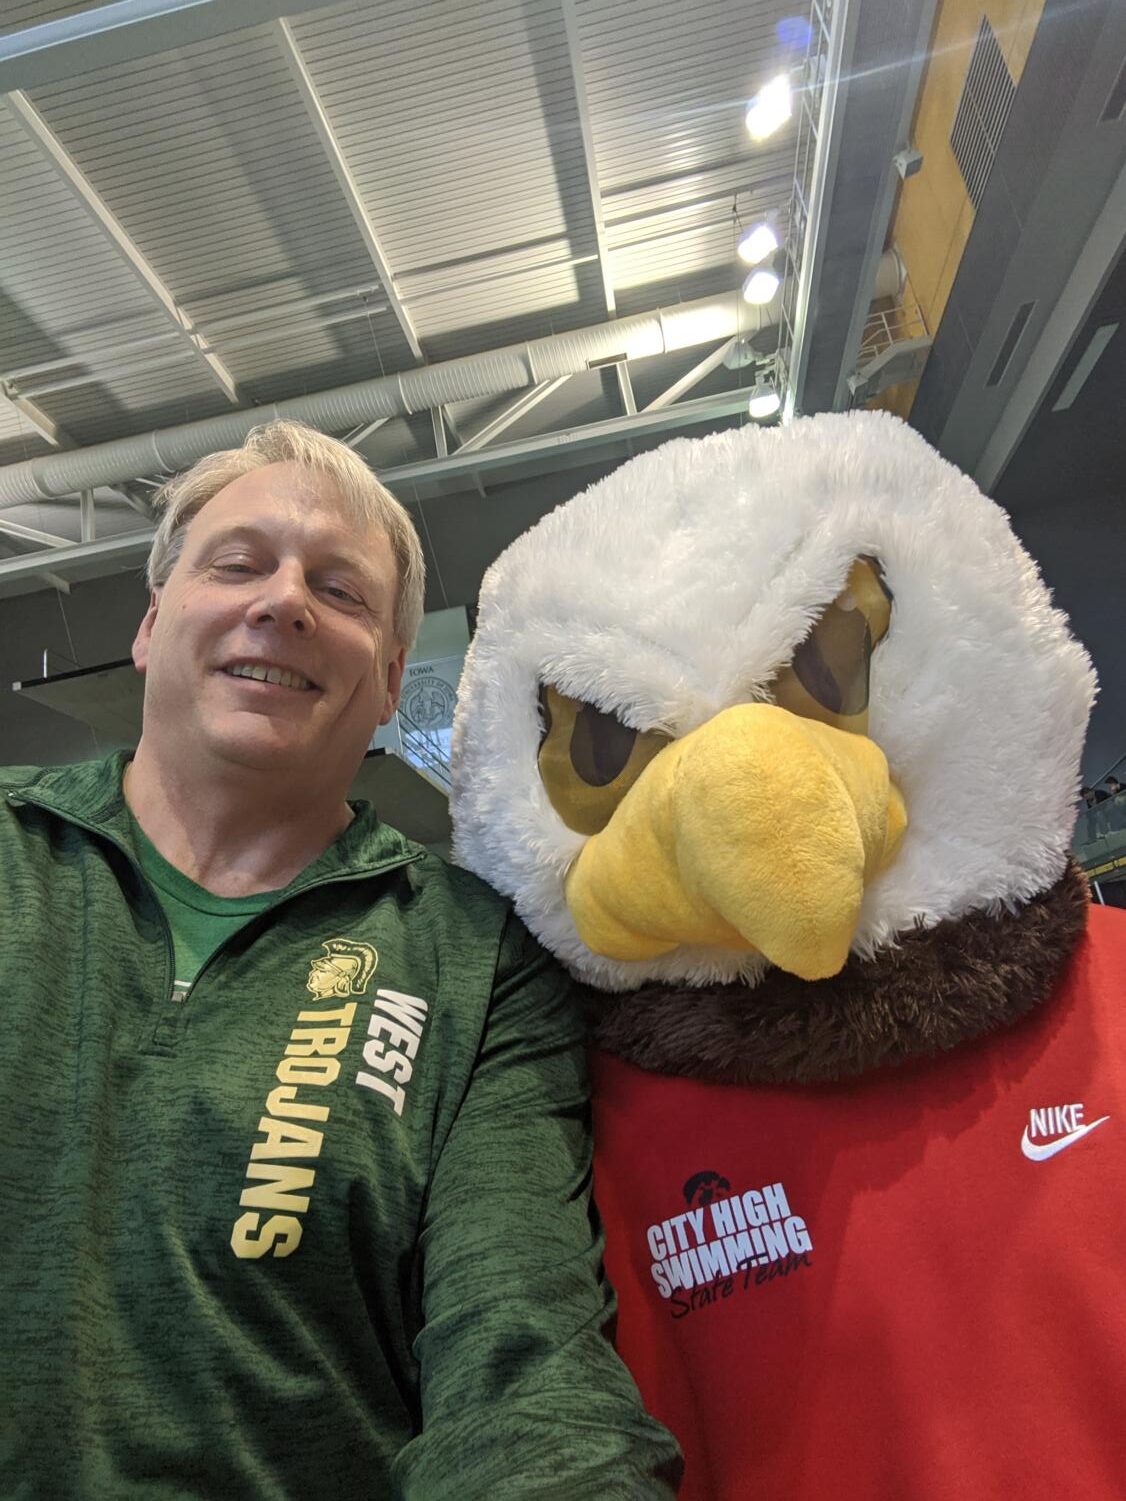 Dr. Shoultz taking a selfie with City high swimming team mascot. 